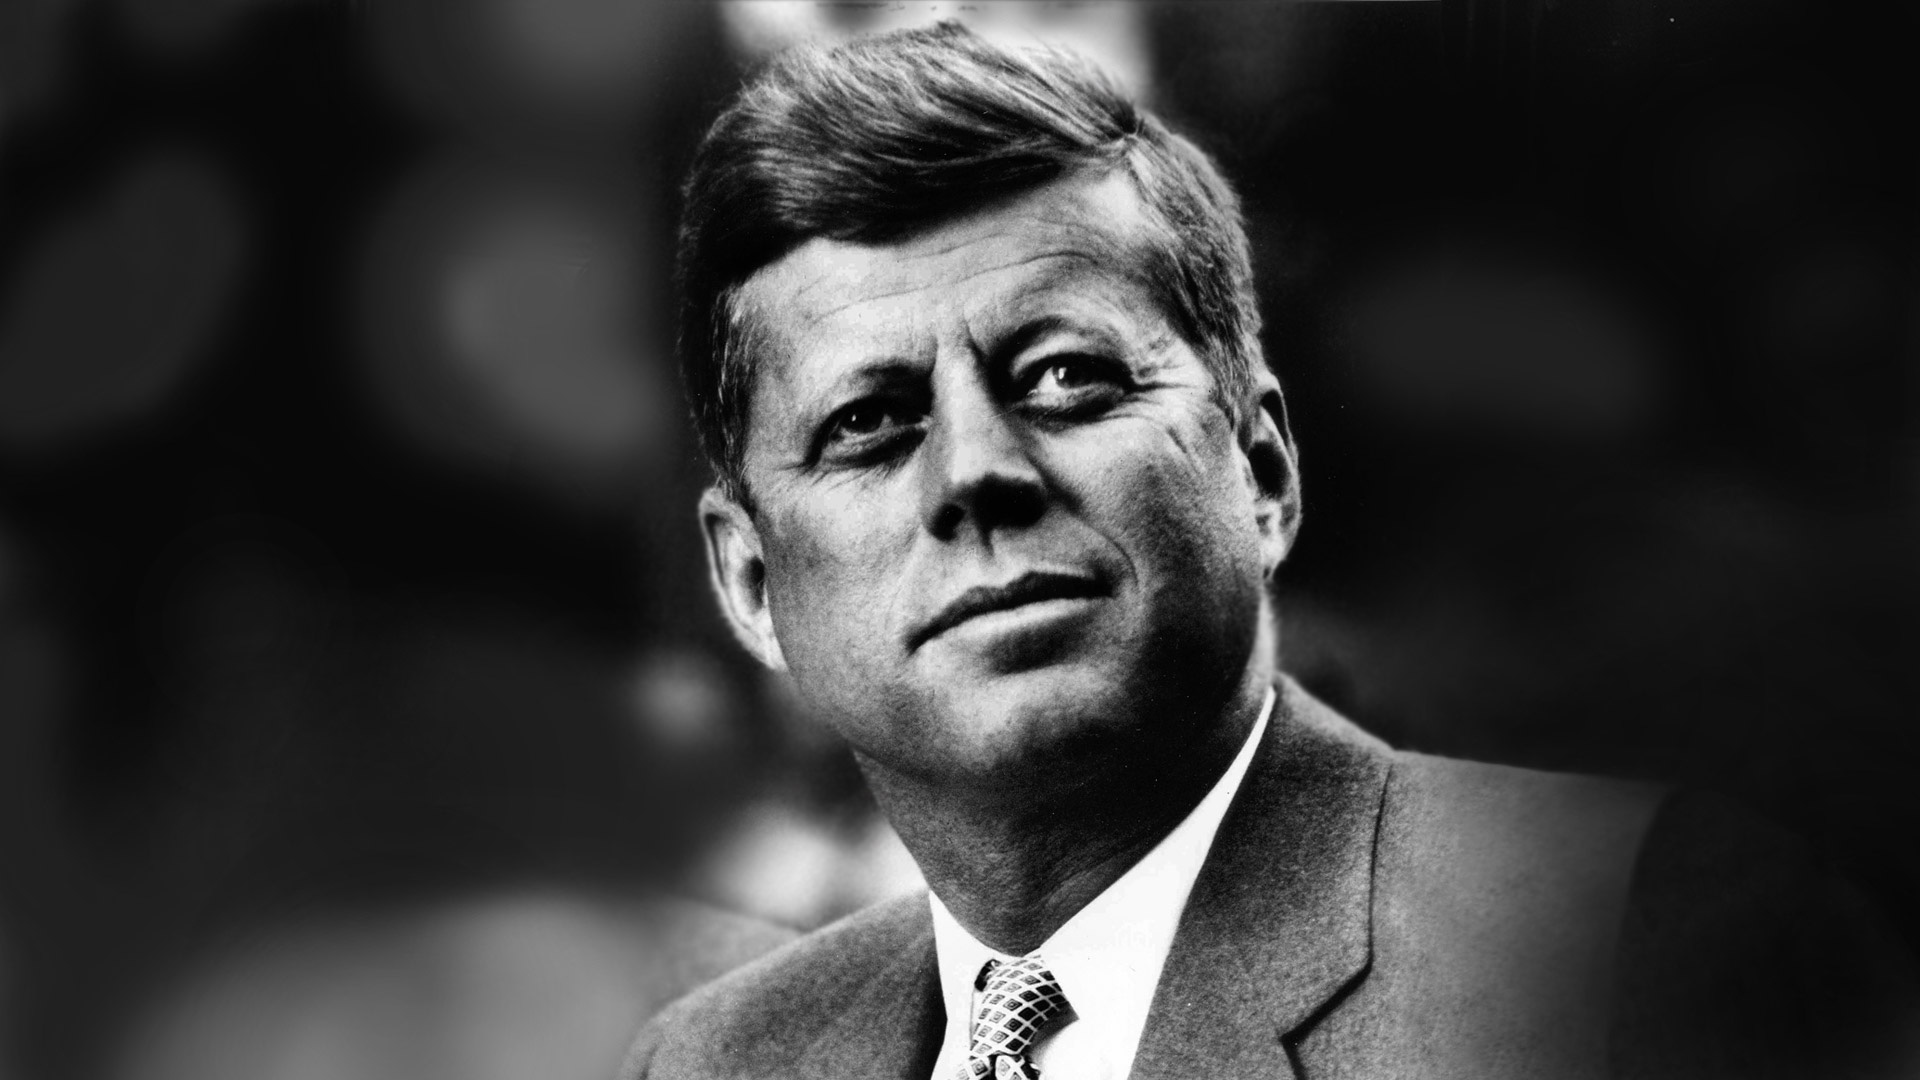 JFK assassination: Trump to allow release of classified documents (CBS NEWS)